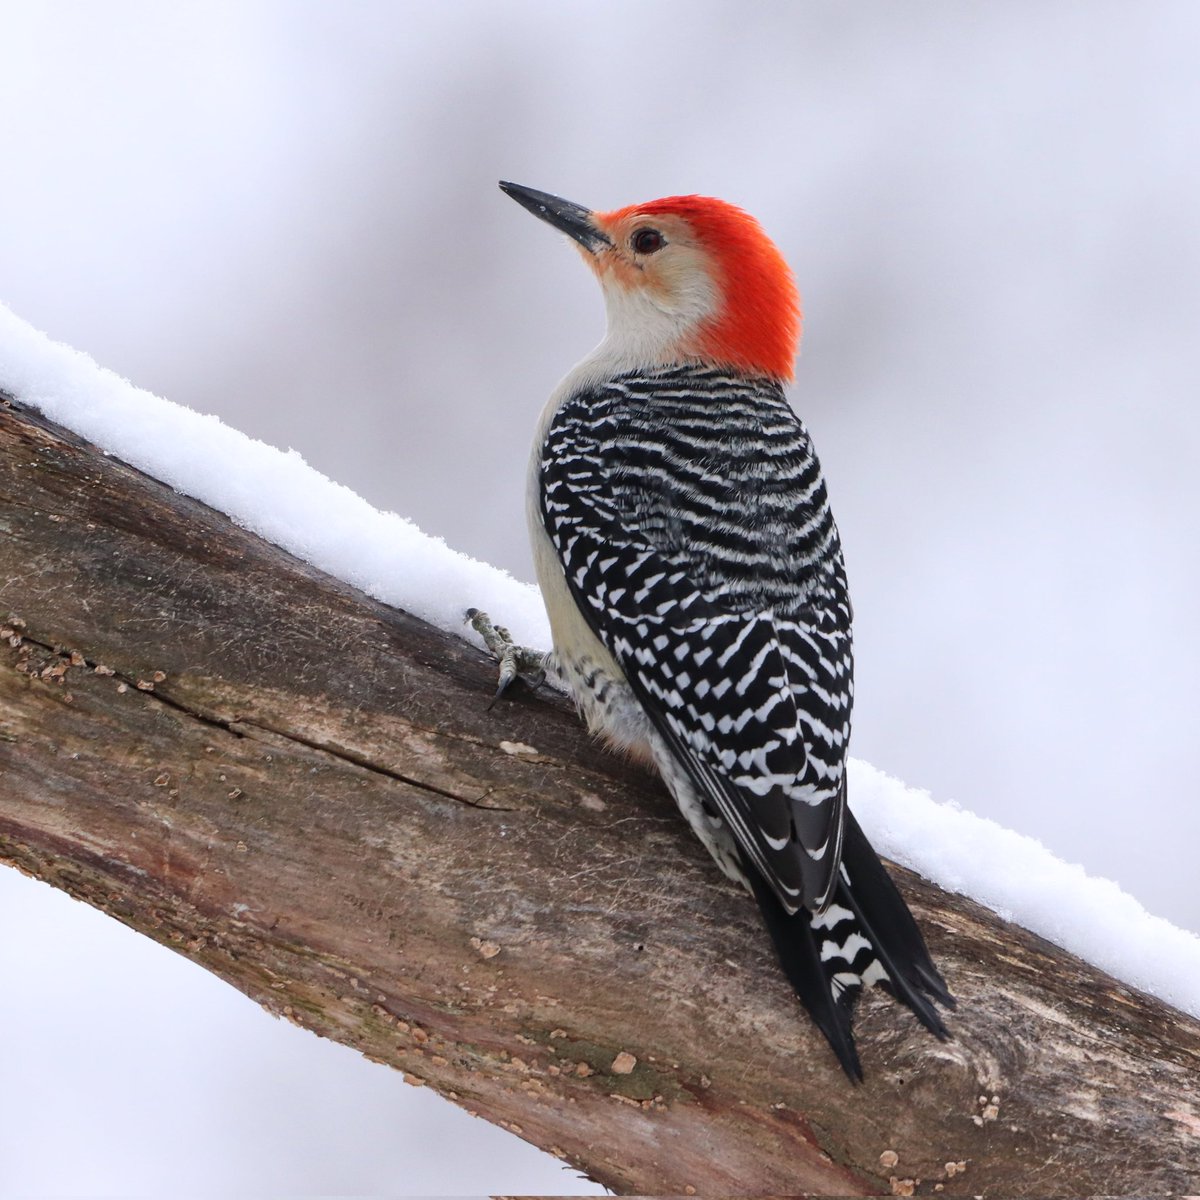 It's a March snow day! ❄️ ❄️ ❄️ 
#redbelliedwoodpecker #birds #woodpeckers #woodpecker #redbelliedwoodpeckers #birding #redhead #snowday #snowdays #marchsnowday❄️ #marchsnow #birding #ohiobirding #ohiobirdworld